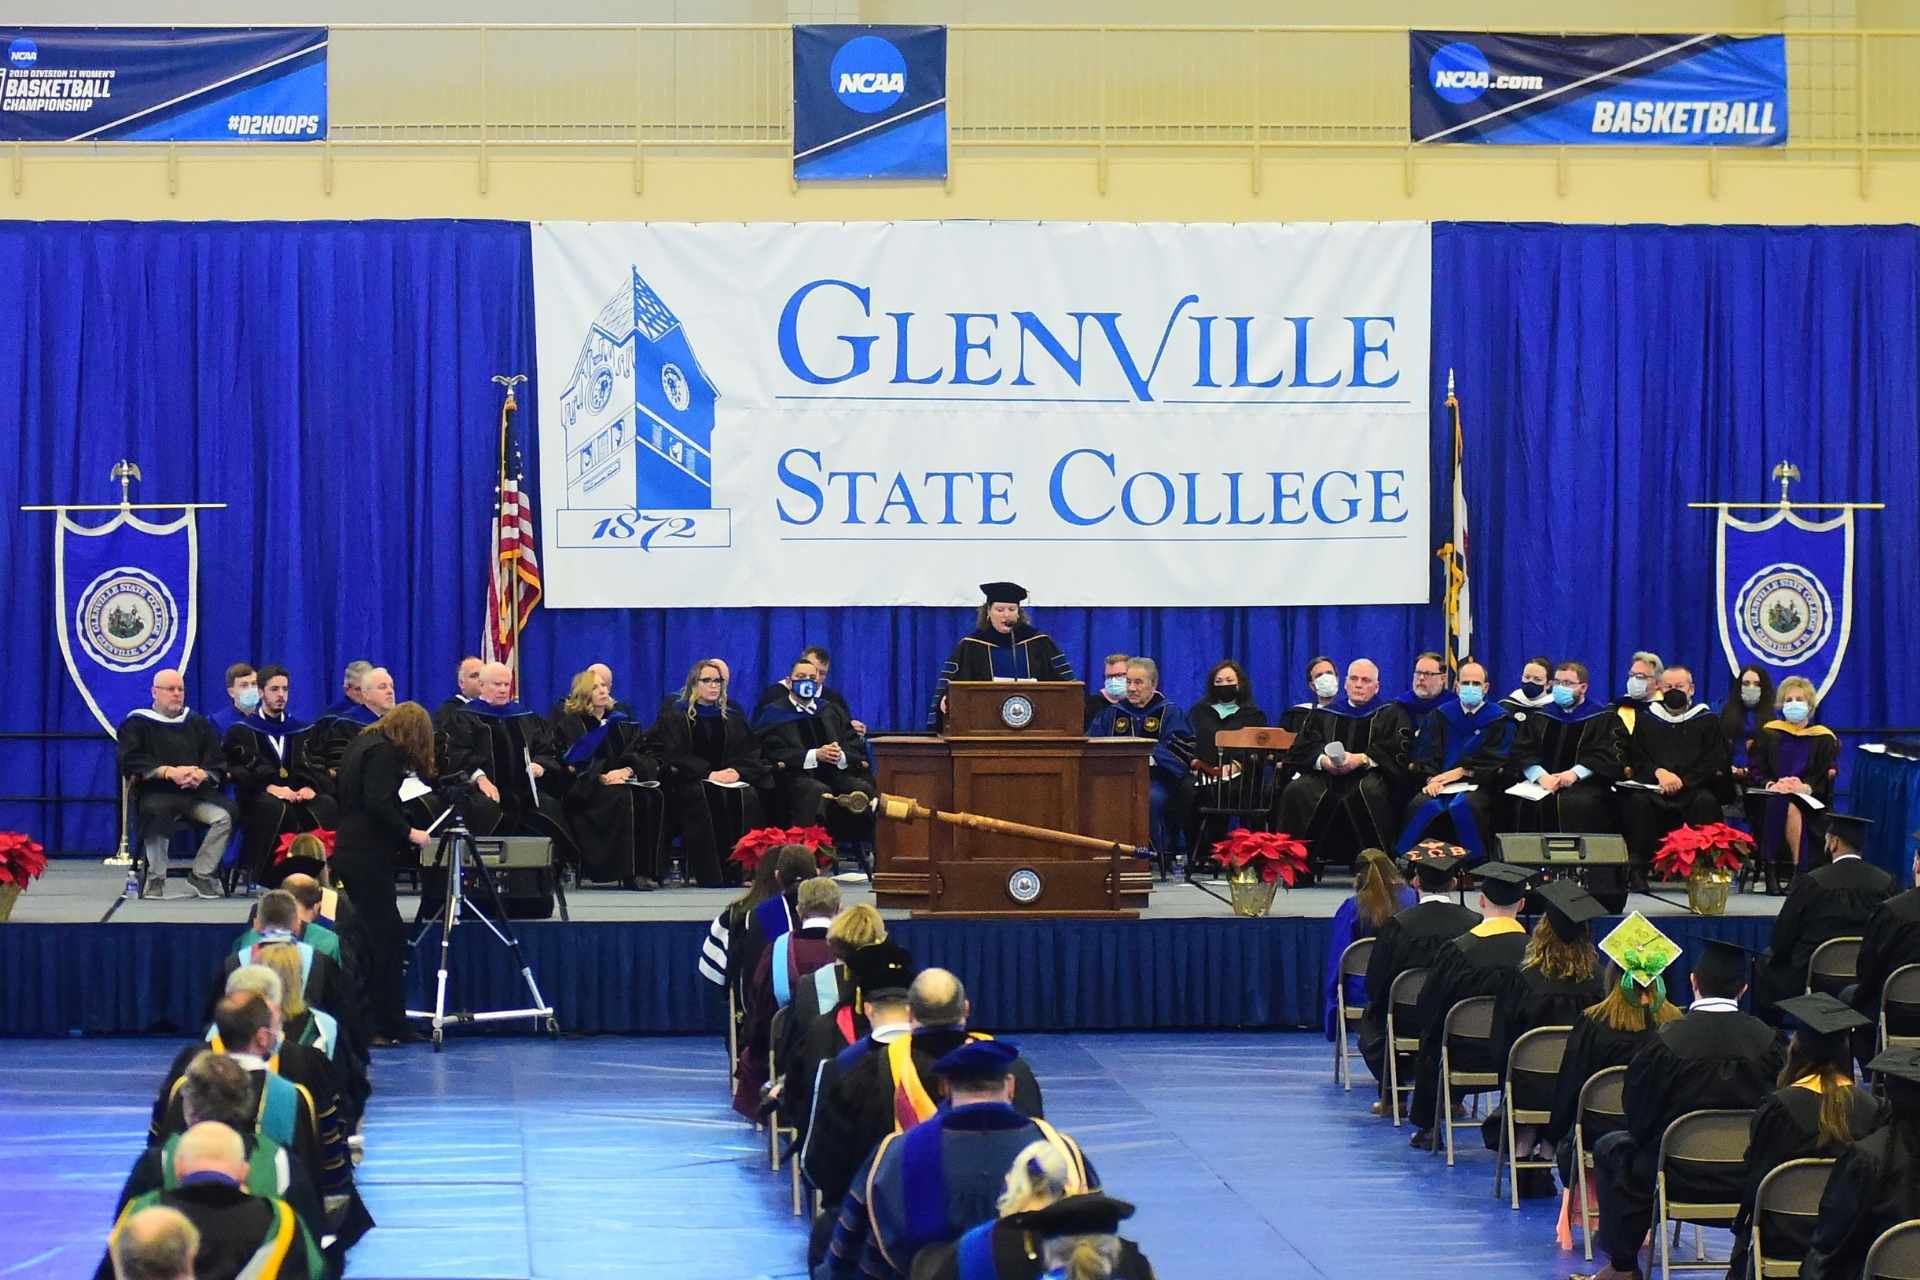 Dr. Sarah Armstrong Tucker, Chancellor of the West Virginia Higher Education Policy Commission and the Community and Technical College System, addresses those gathered at Glenville State’s Winter Commencement ceremony in December.